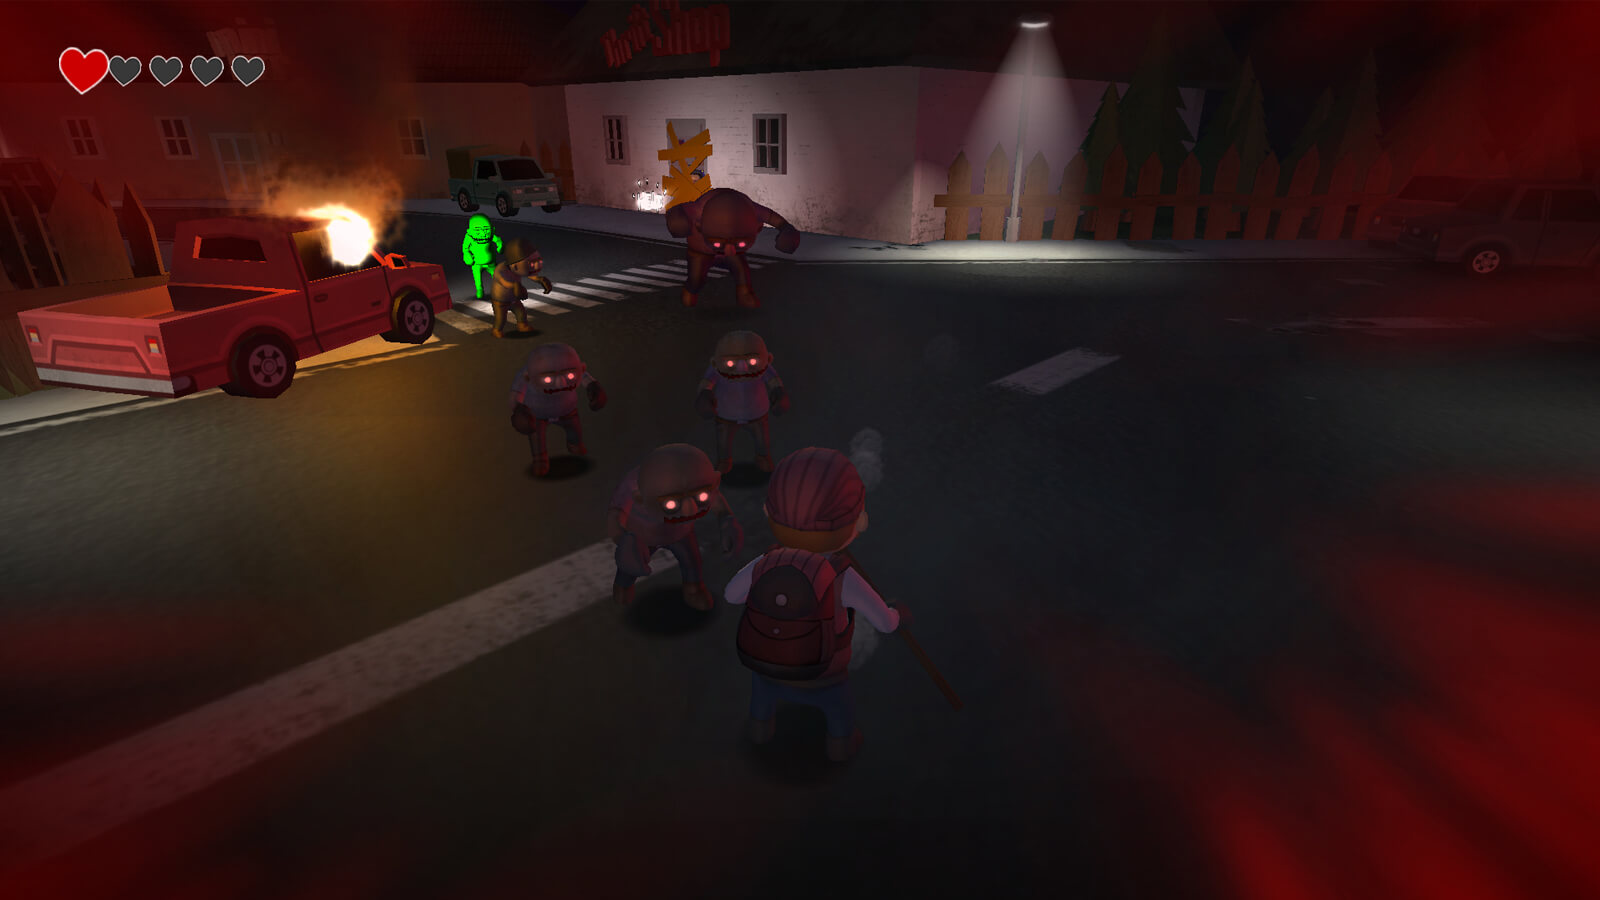 Zombies shamble toward the player's character at an intersection. A pickup truck is on fire on the curb.